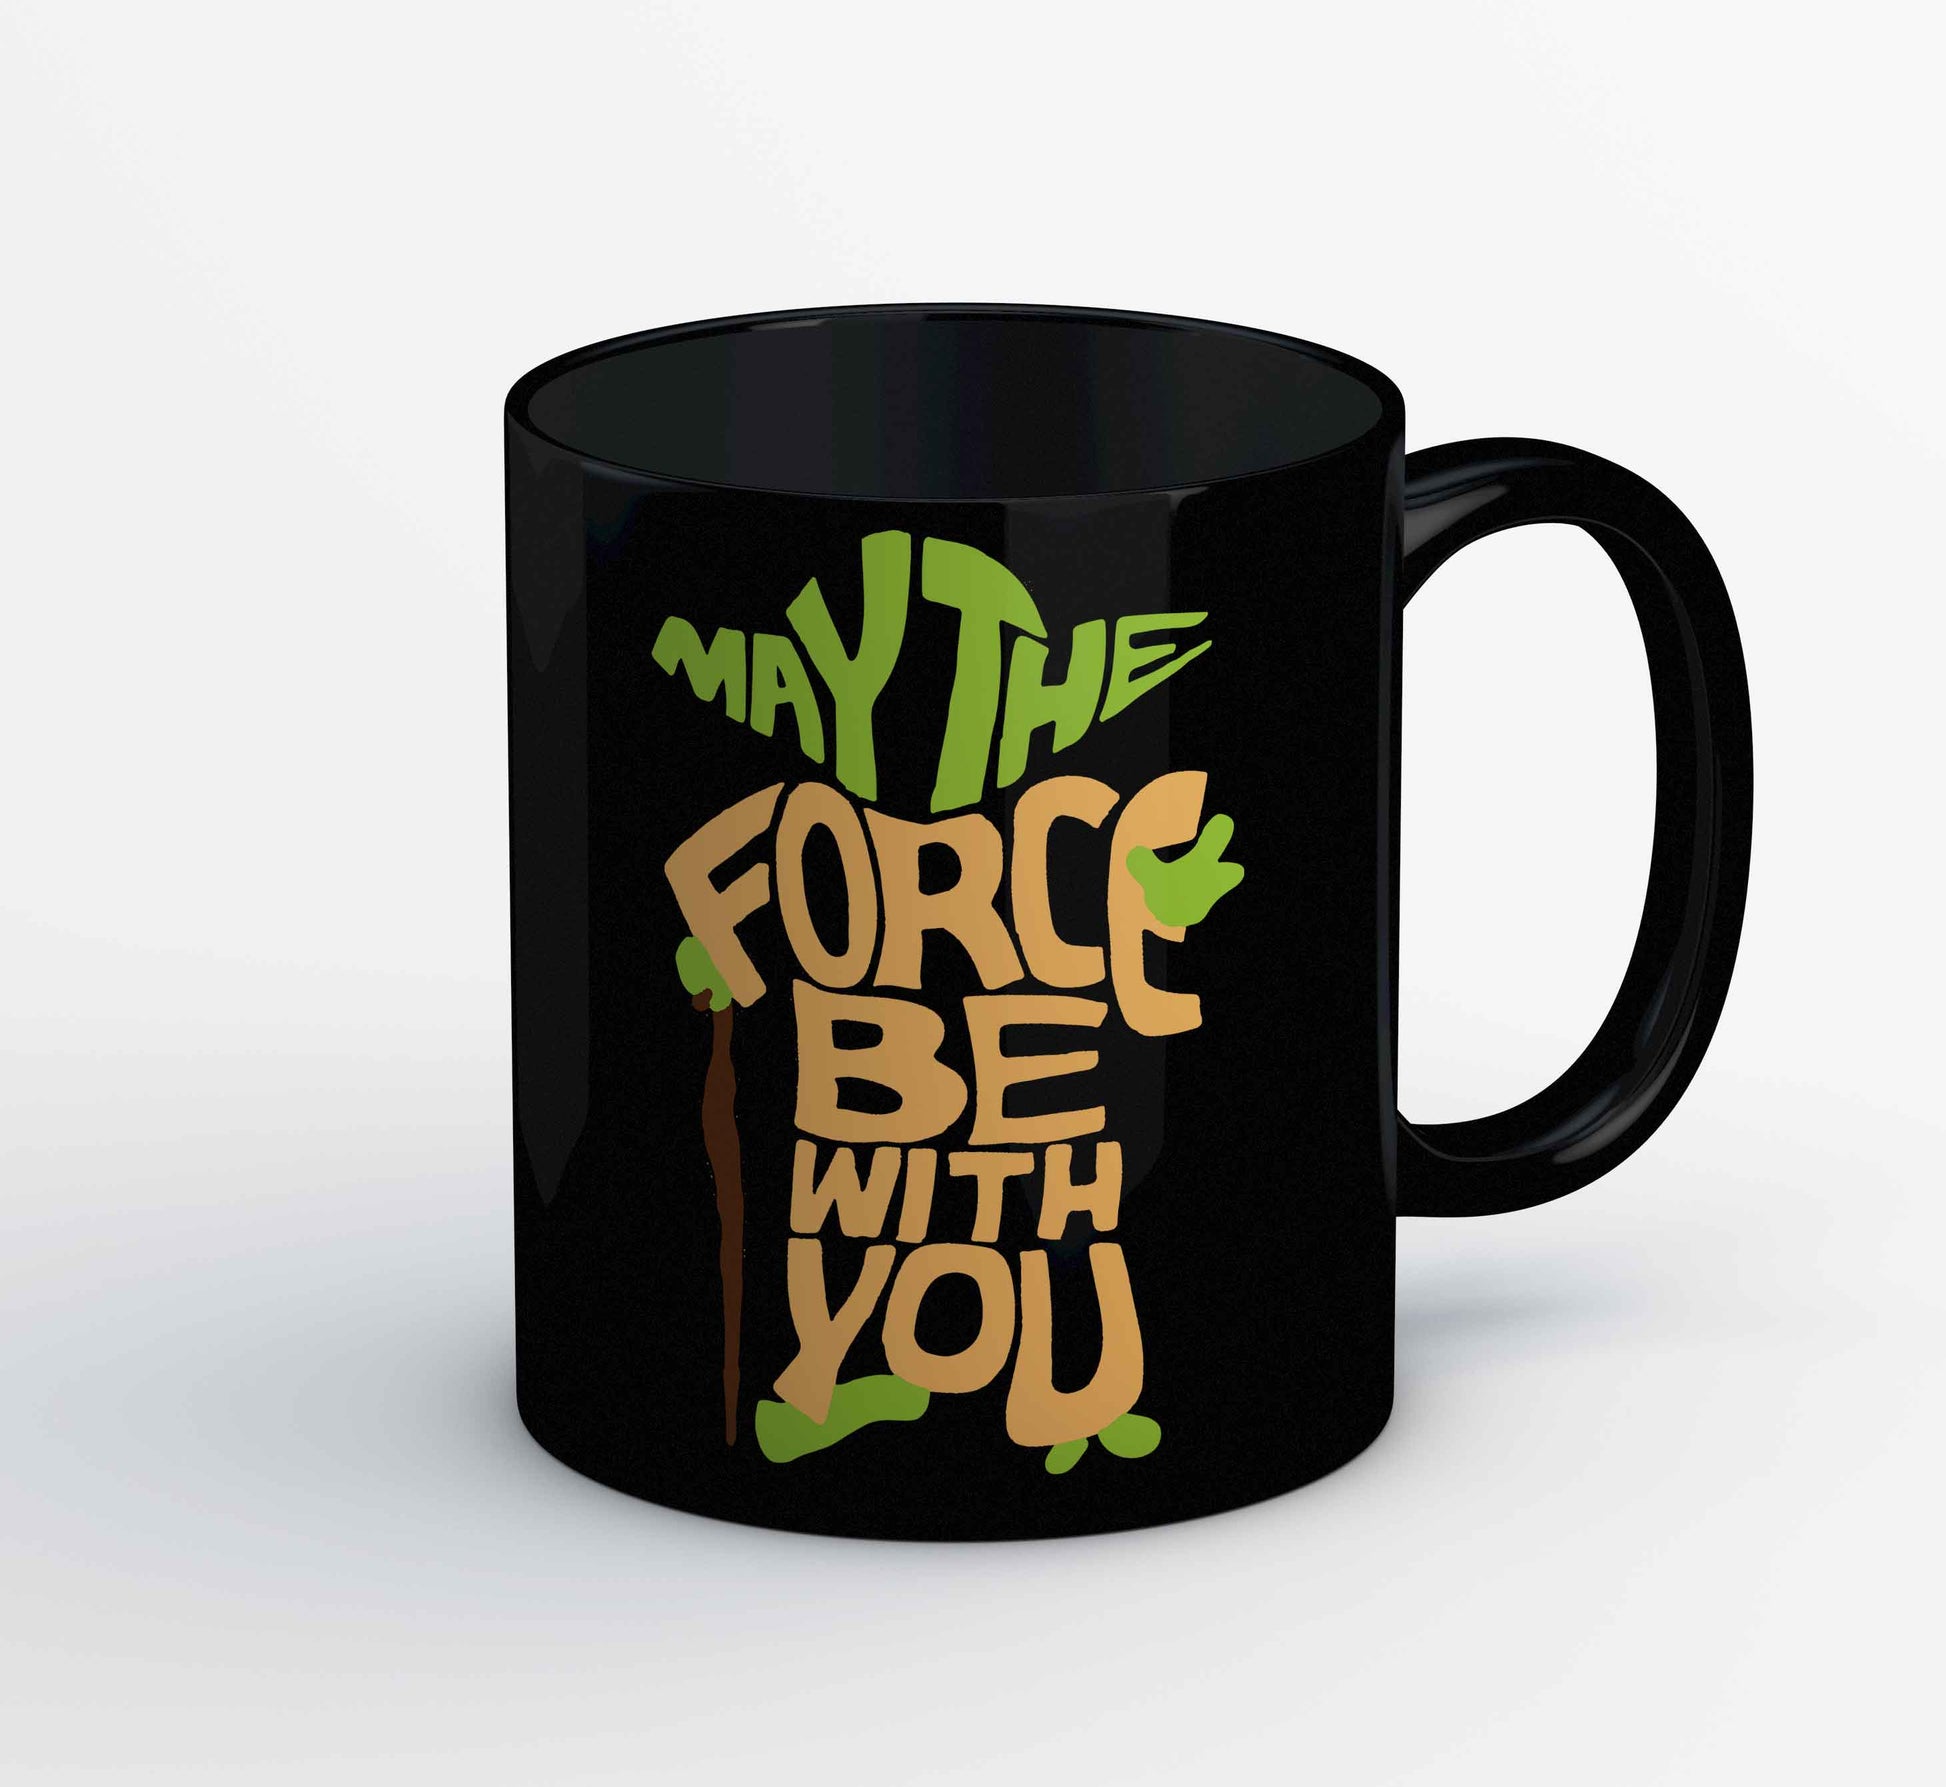 star wars may the force be with you mug coffee ceramic tv & movies buy online india the banyan tee tbt men women girls boys unisex  yoda